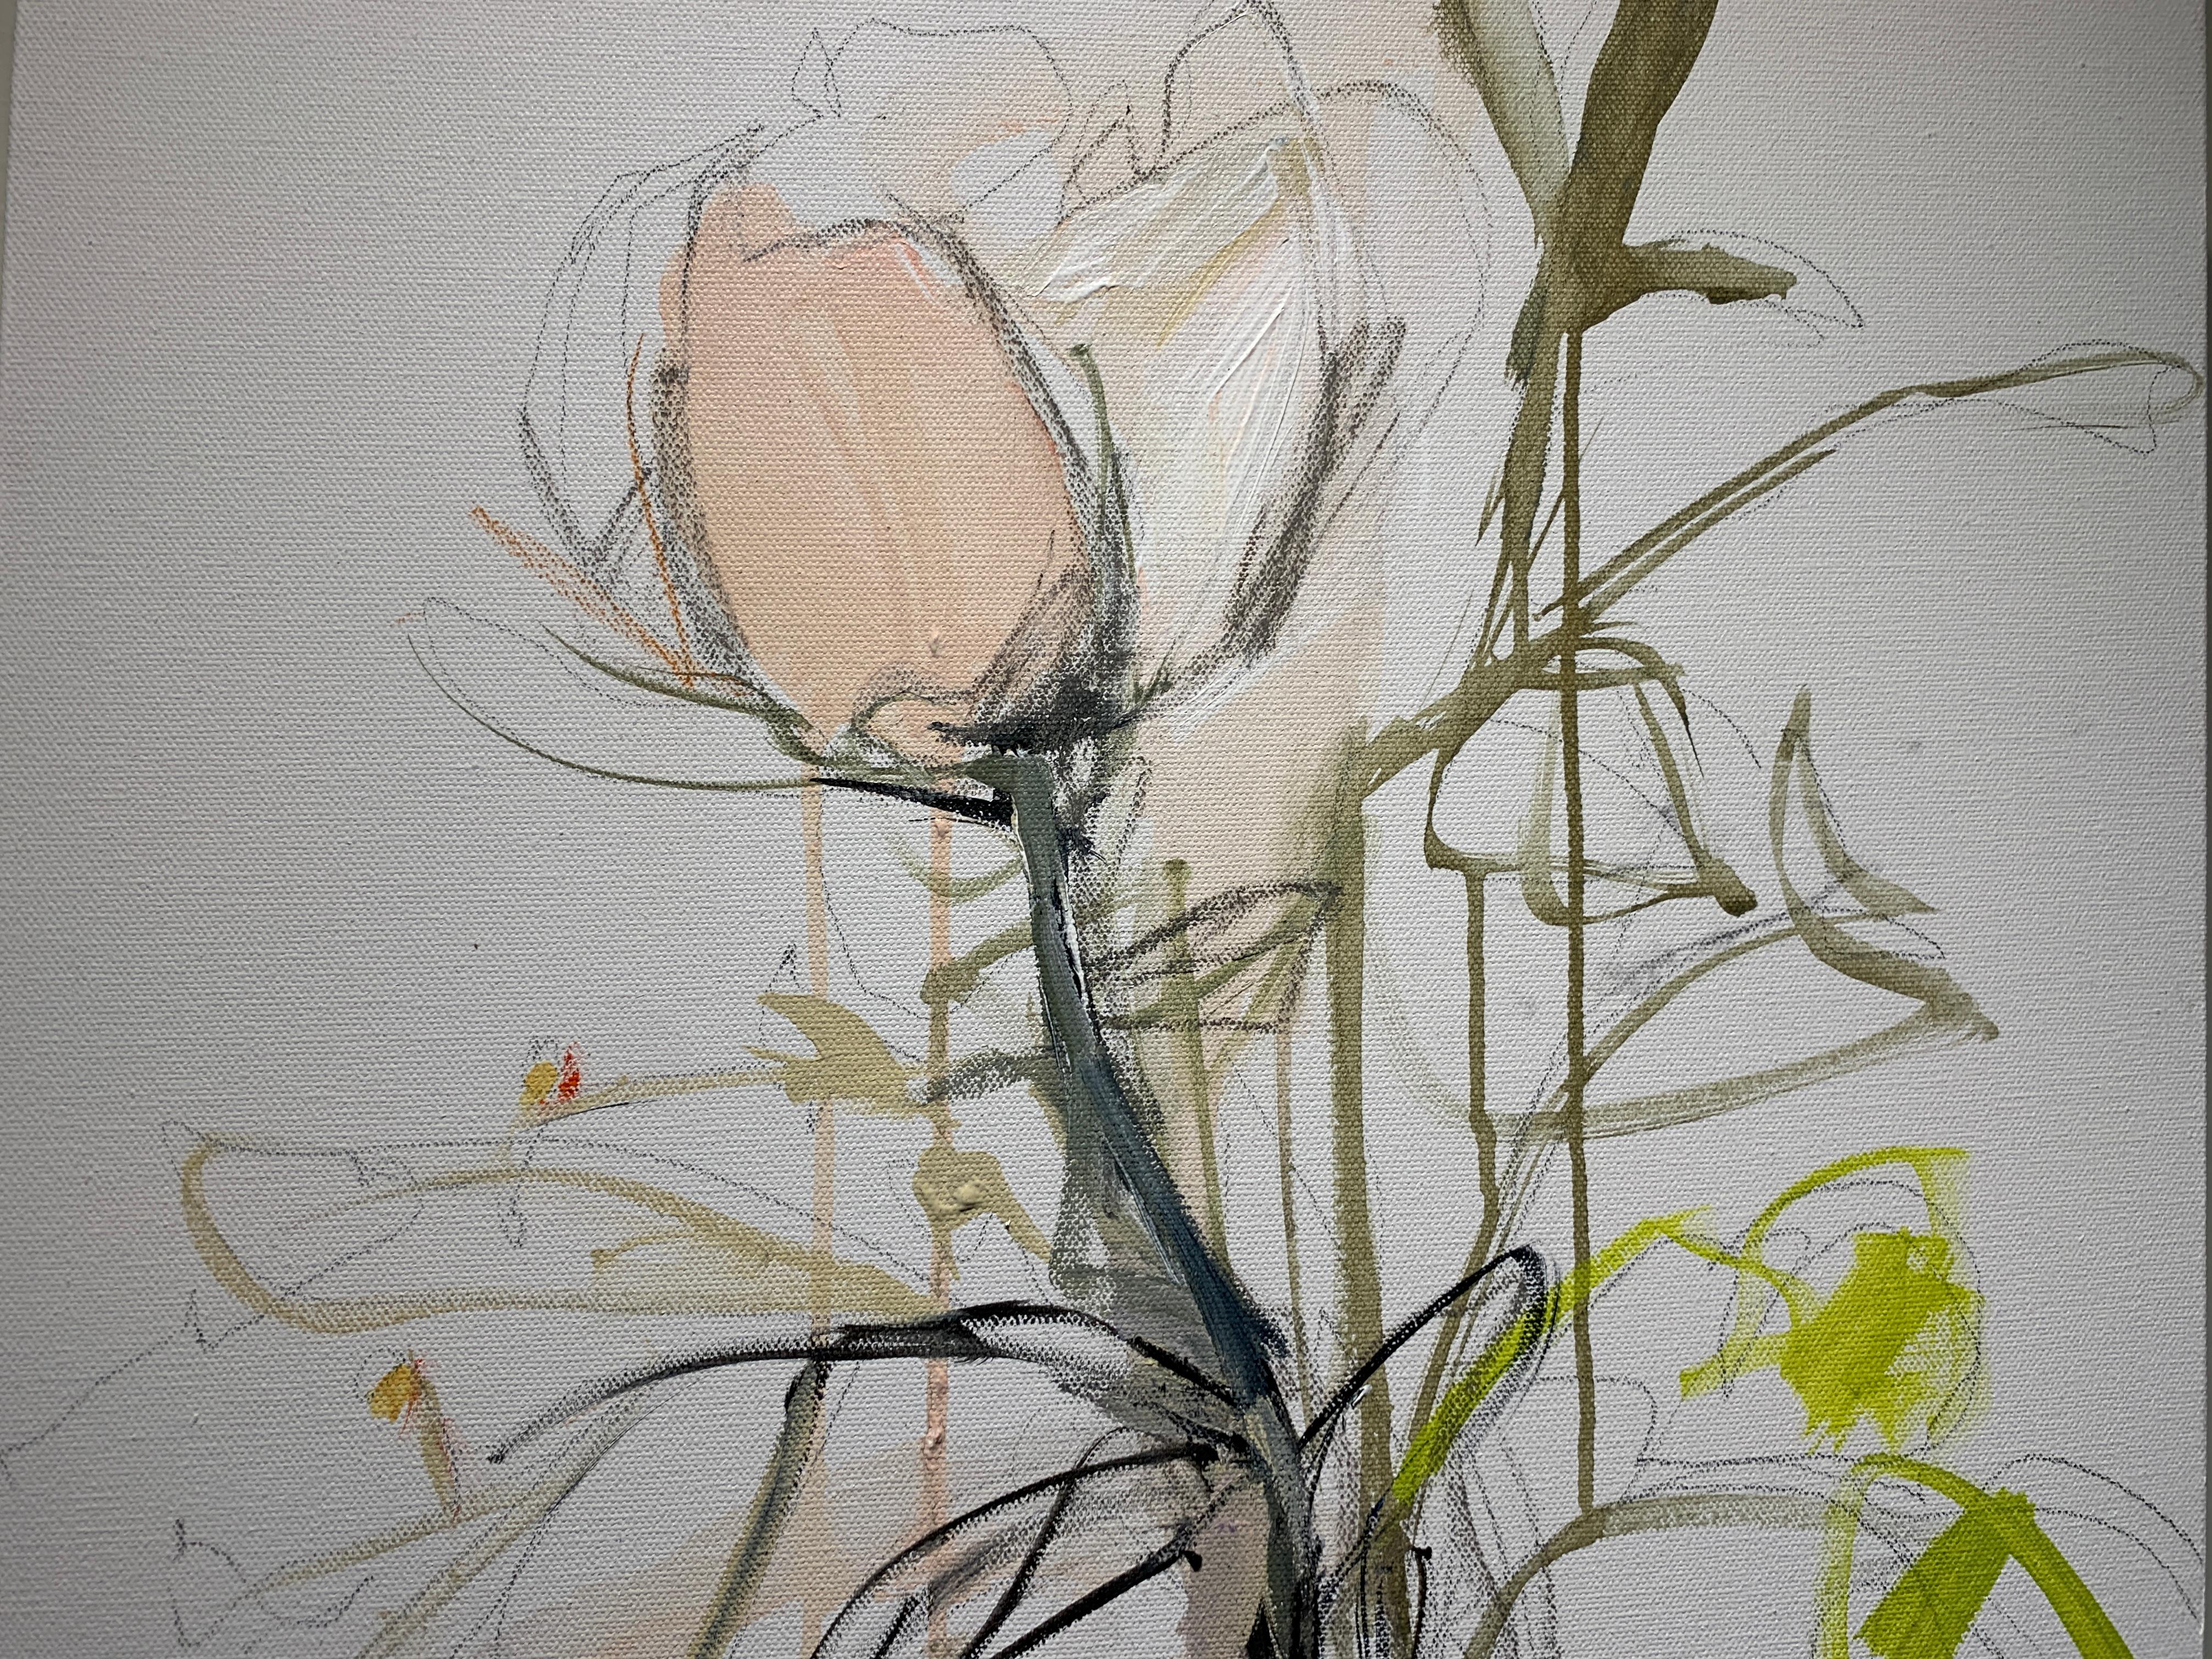 Collected by Kelley B. Ogburn, Mixed Media on Canvas Floral Painting 5